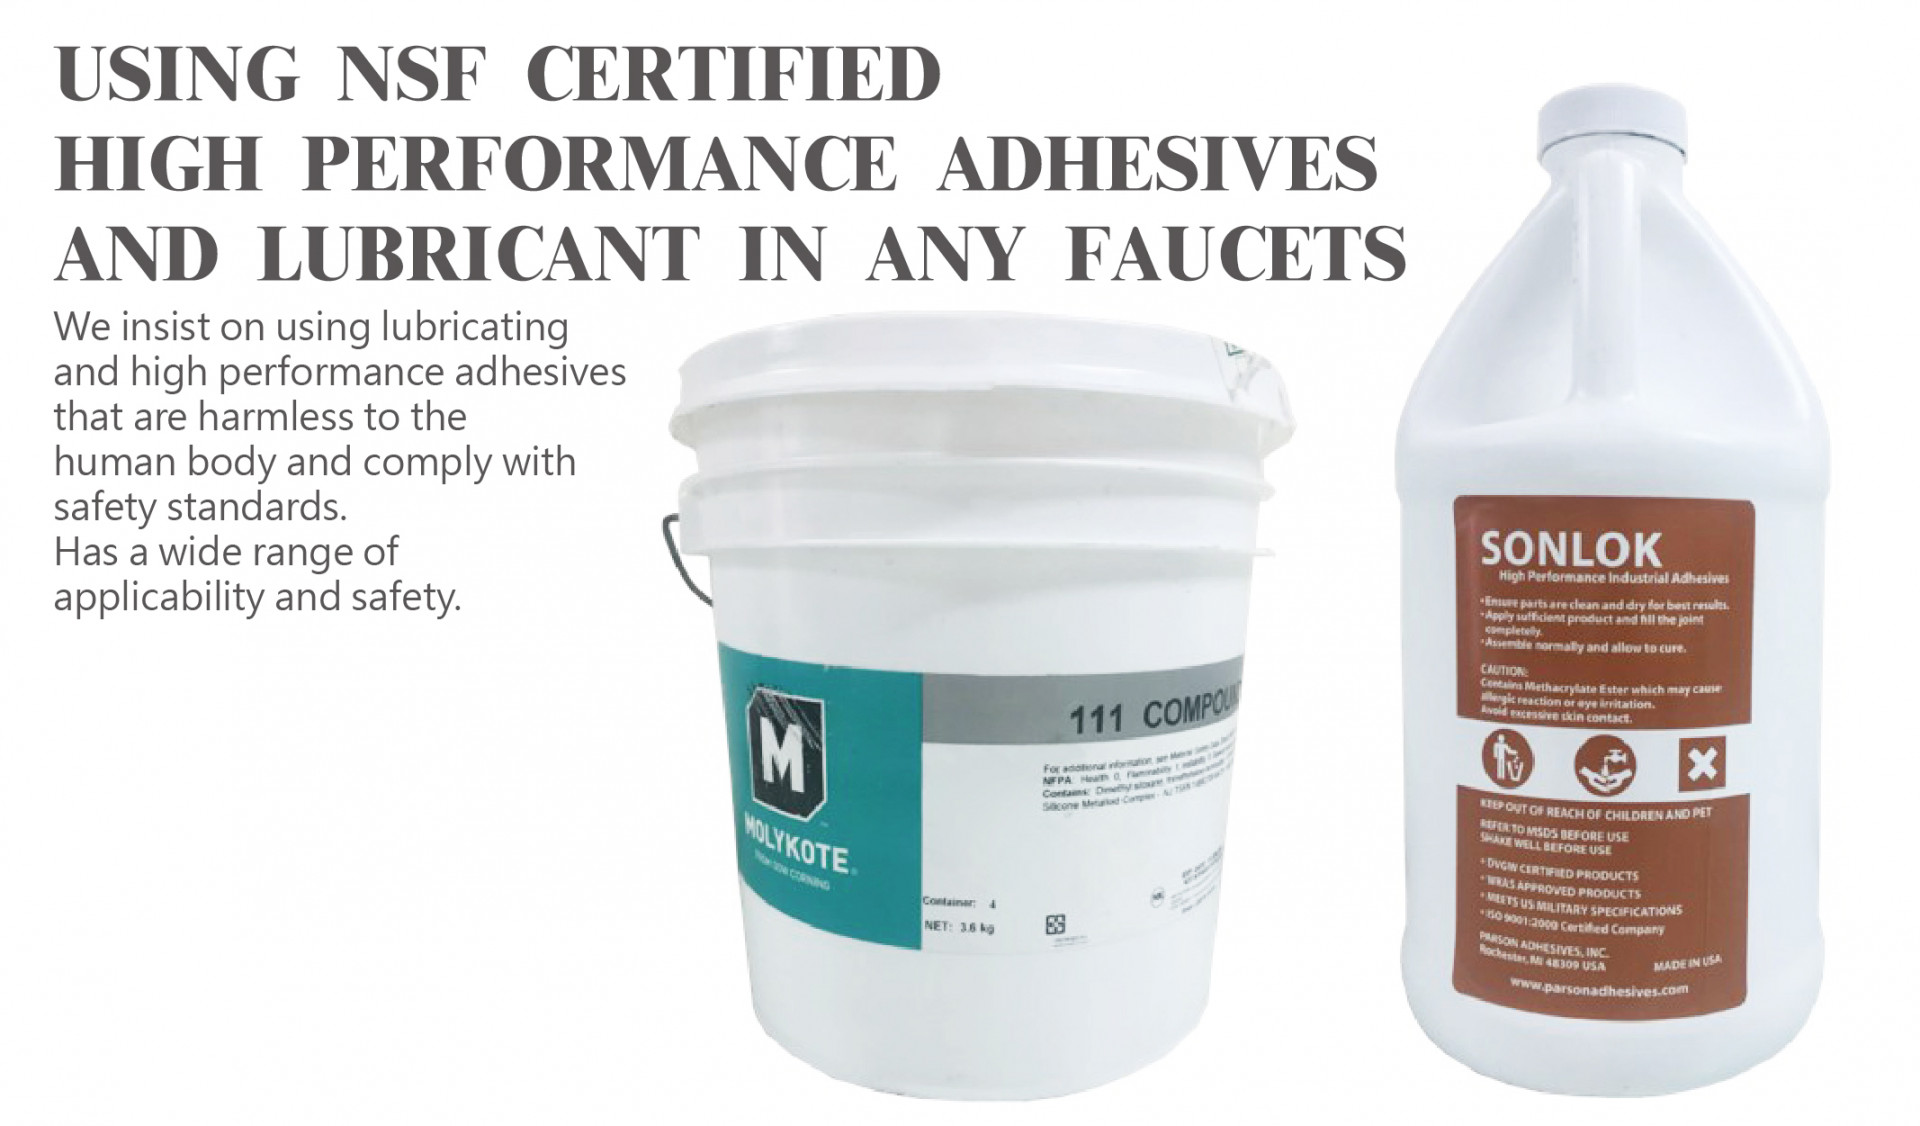 FAUCET USING NSF CERTIFIED HIGH PERFORMANCE ADHESIVES AND LUBRICANT IN ANY FAUCETS